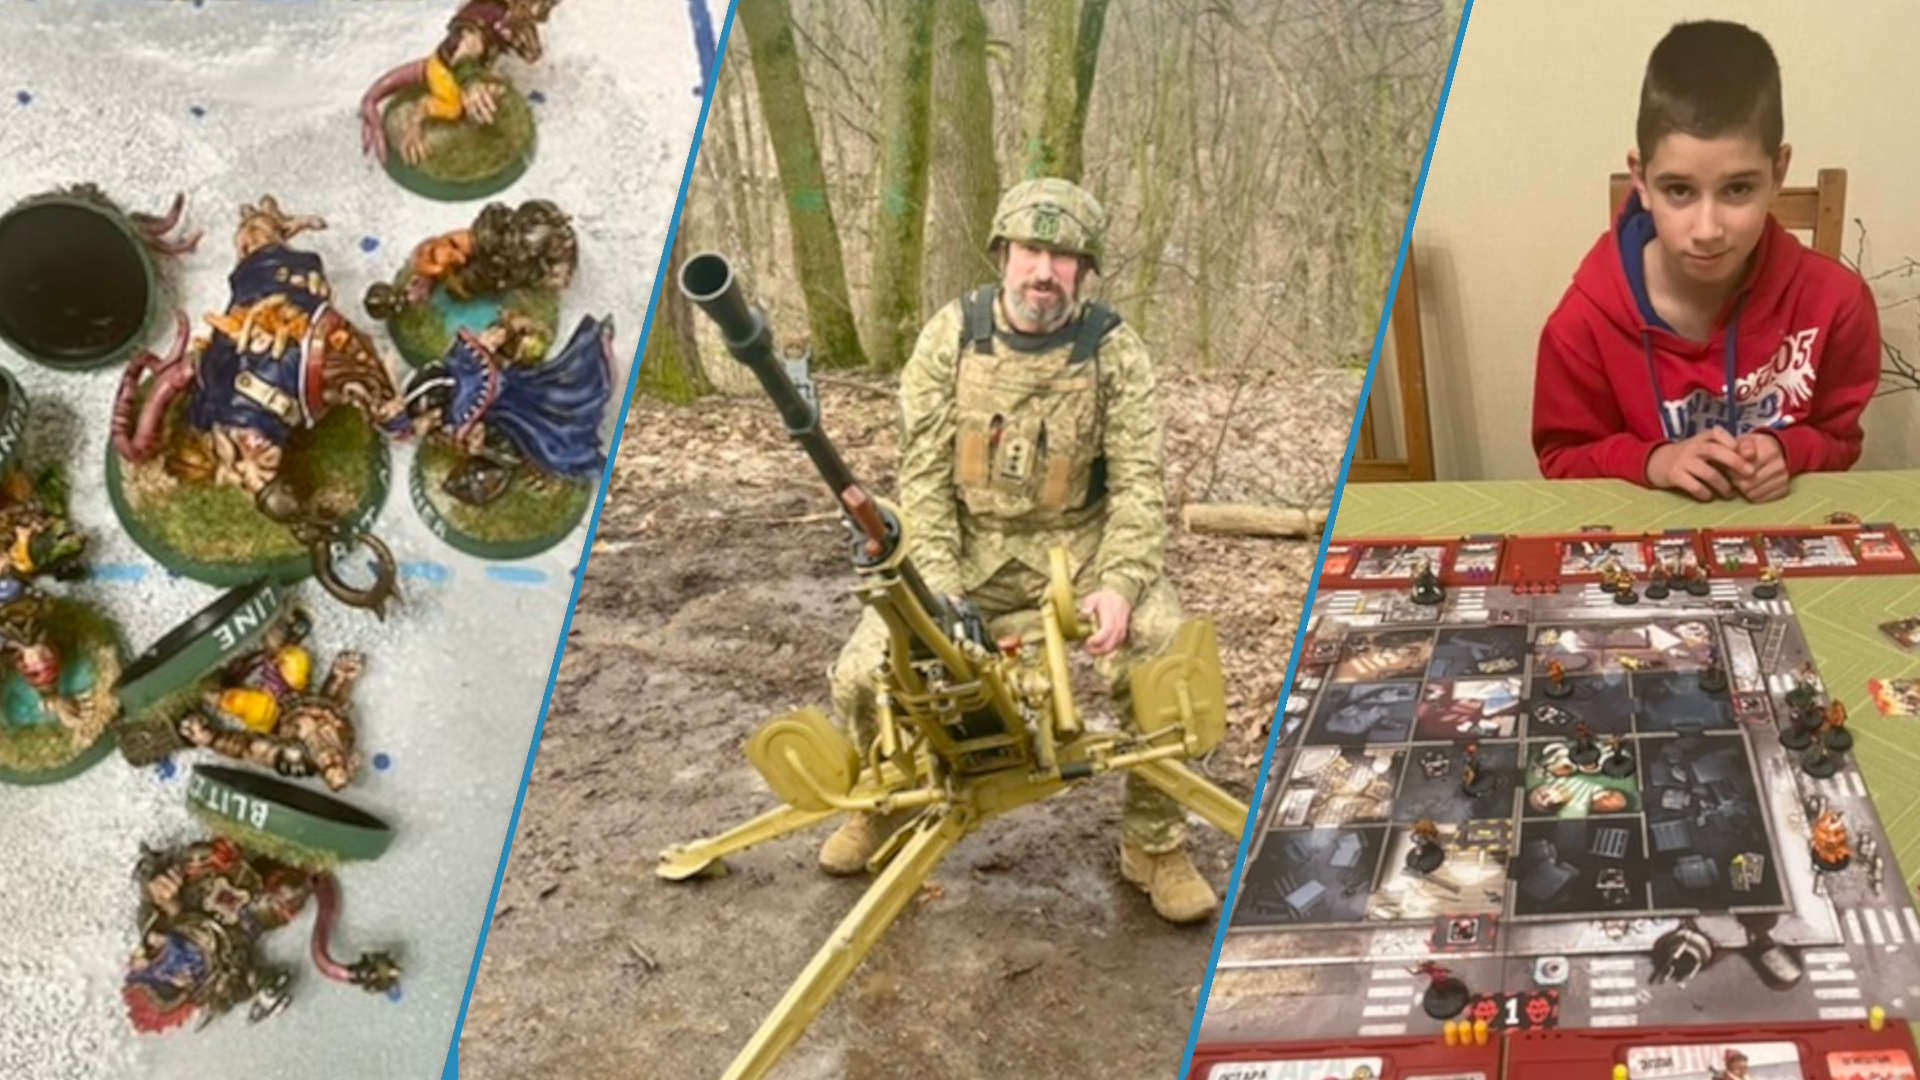 Warhammer board game connects father and son separated by war